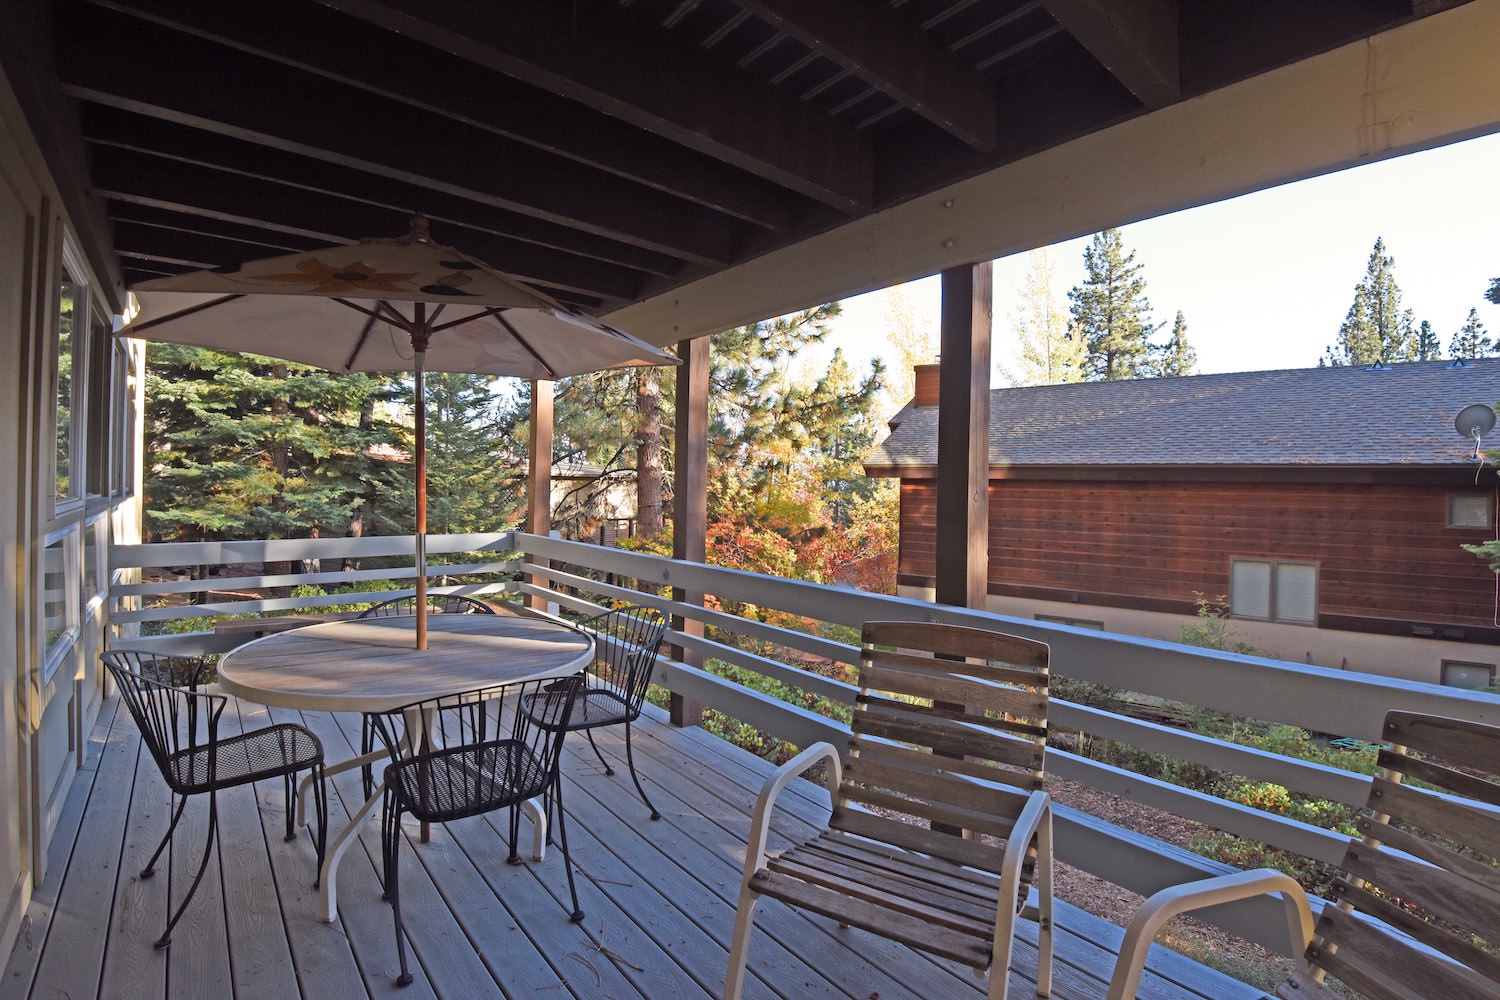 Downstairs deck with patio furniture